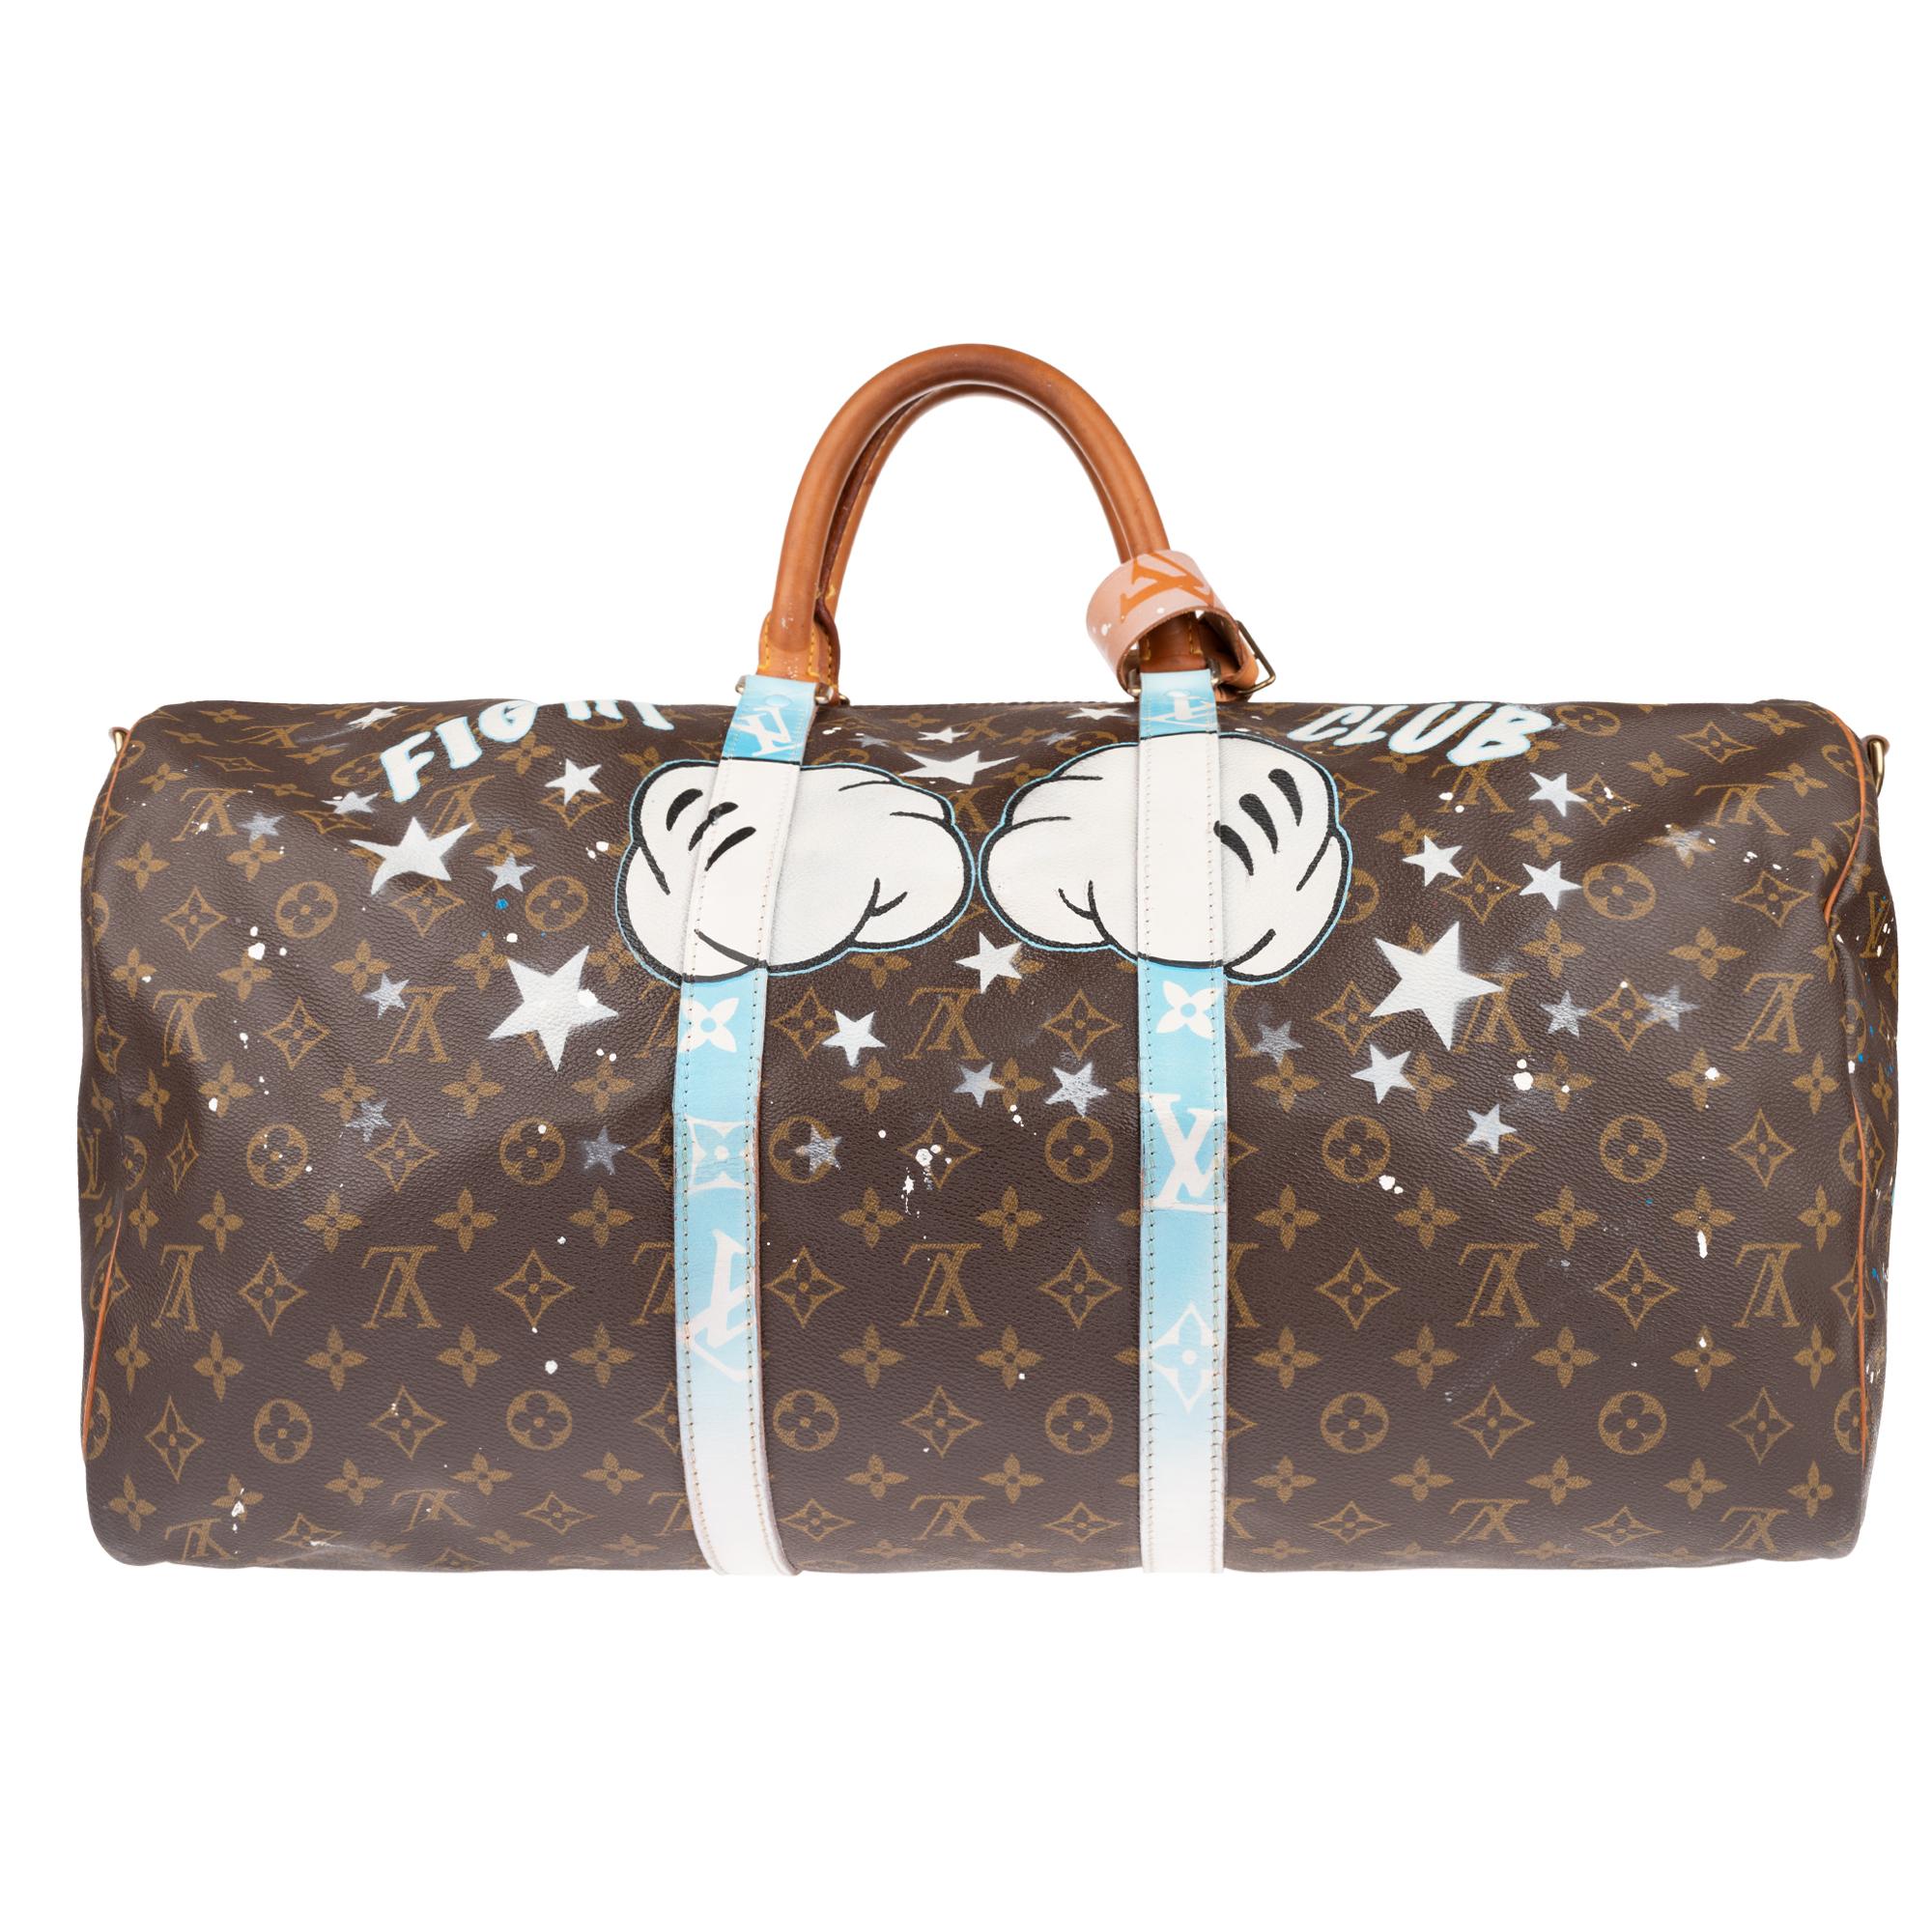 Exceptional travel bag Louis Vuitton Keepall 55 cm in monogram brown canvas and natural leather personalized by our Street Art artist Patbo on the theme of 